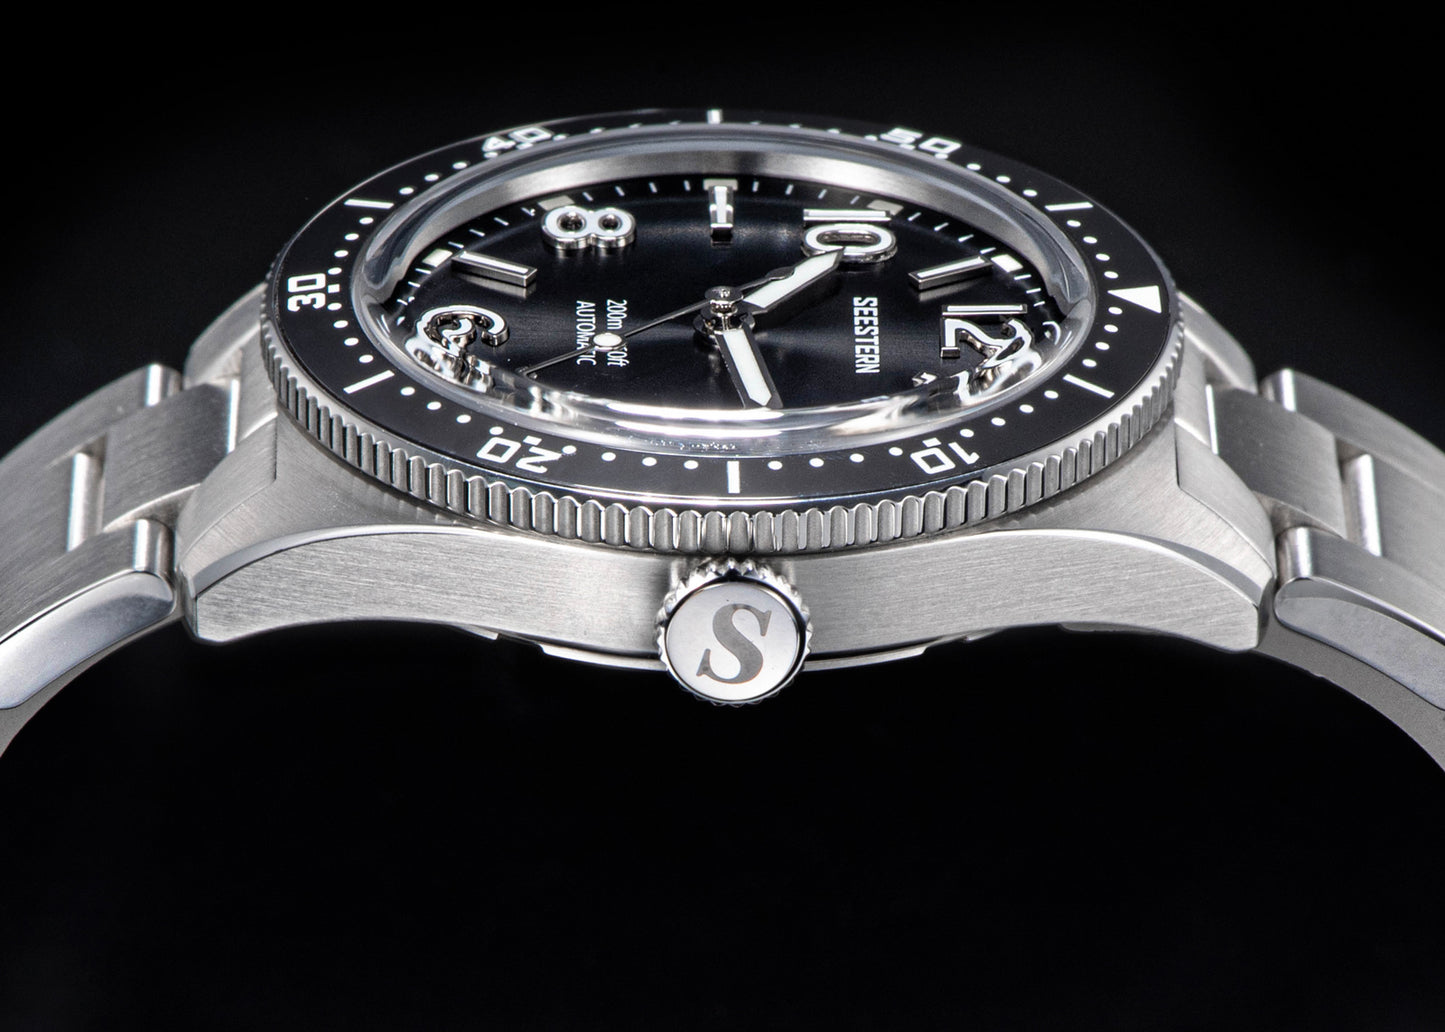 Seestern S435 Professional Diver Stainless-Steel Bracelet (Seagull ST2130 movement)